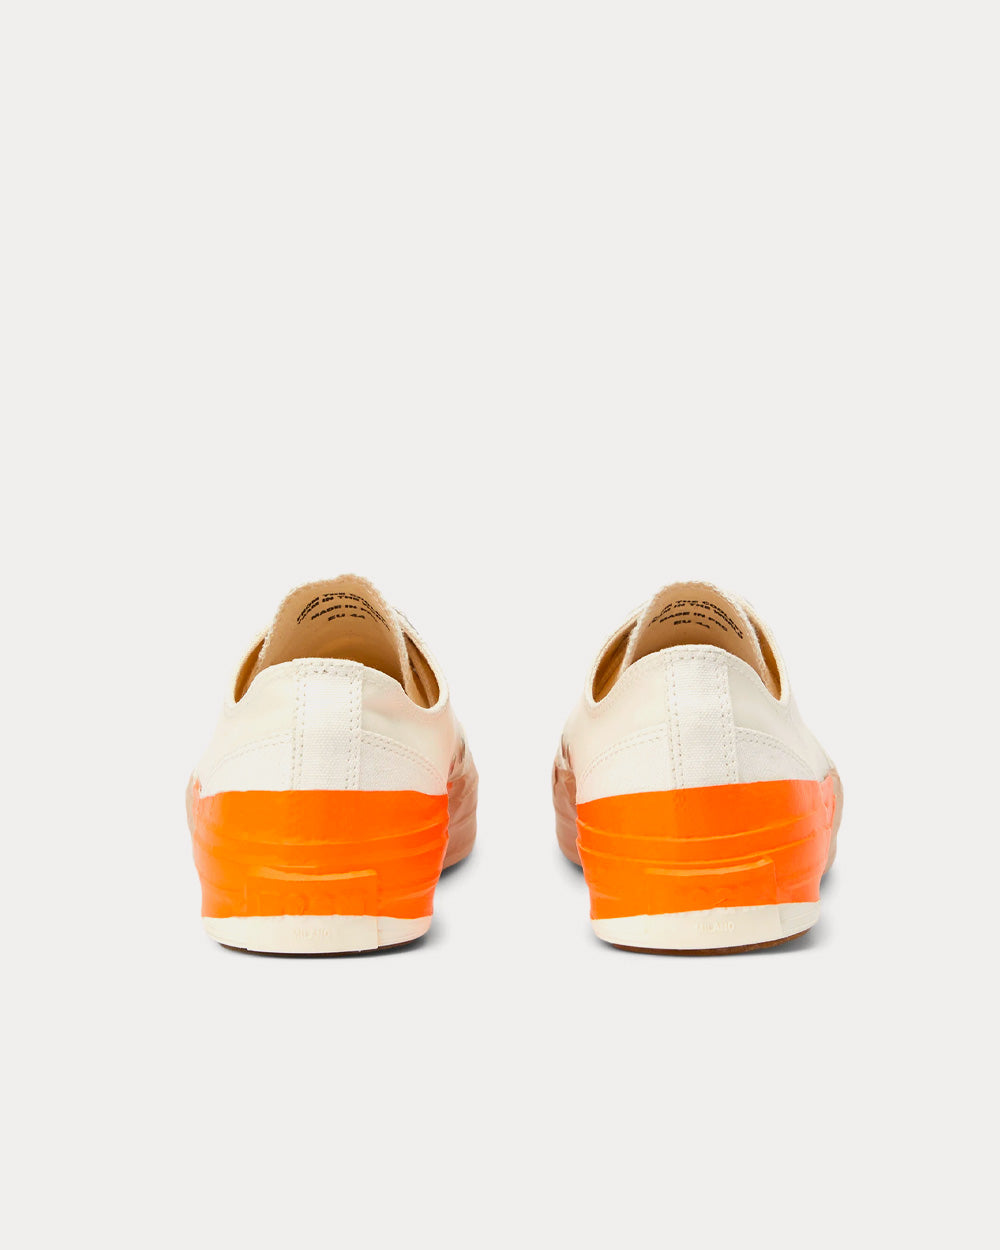 MSGM - Tape Appliqued Vulcanized Canvas White / Orange Low Top Sneakers